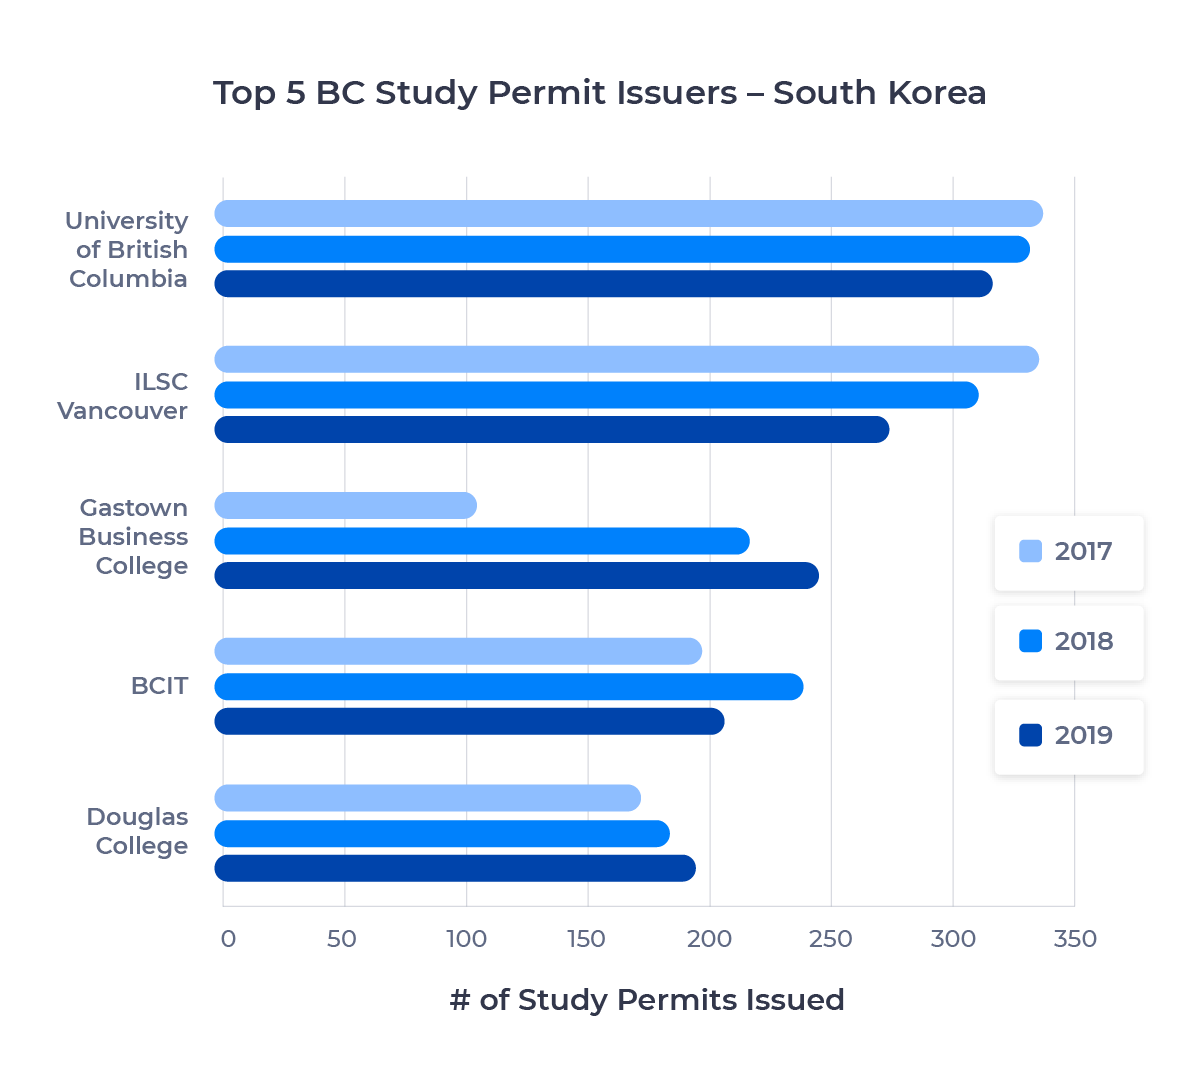 Bar chart showing the top five schools in British Columbia for South Korean students by study permits issued. Described in detail below.